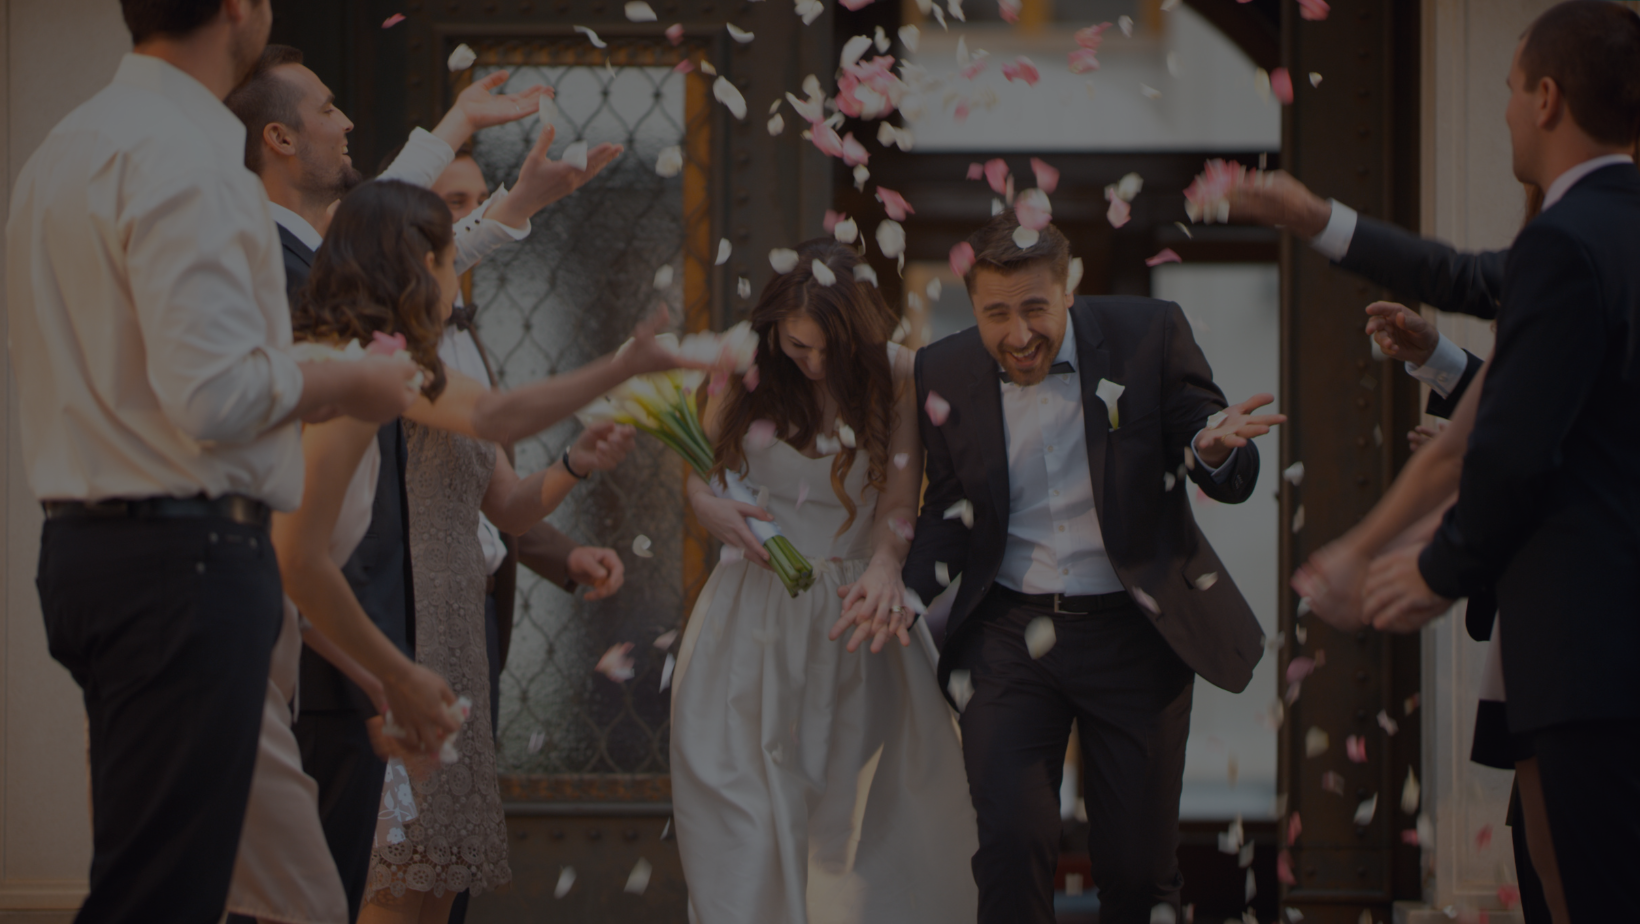 A bride and groom being showered in confetti as they exit their wedding ceremony. Wedding song checklist.